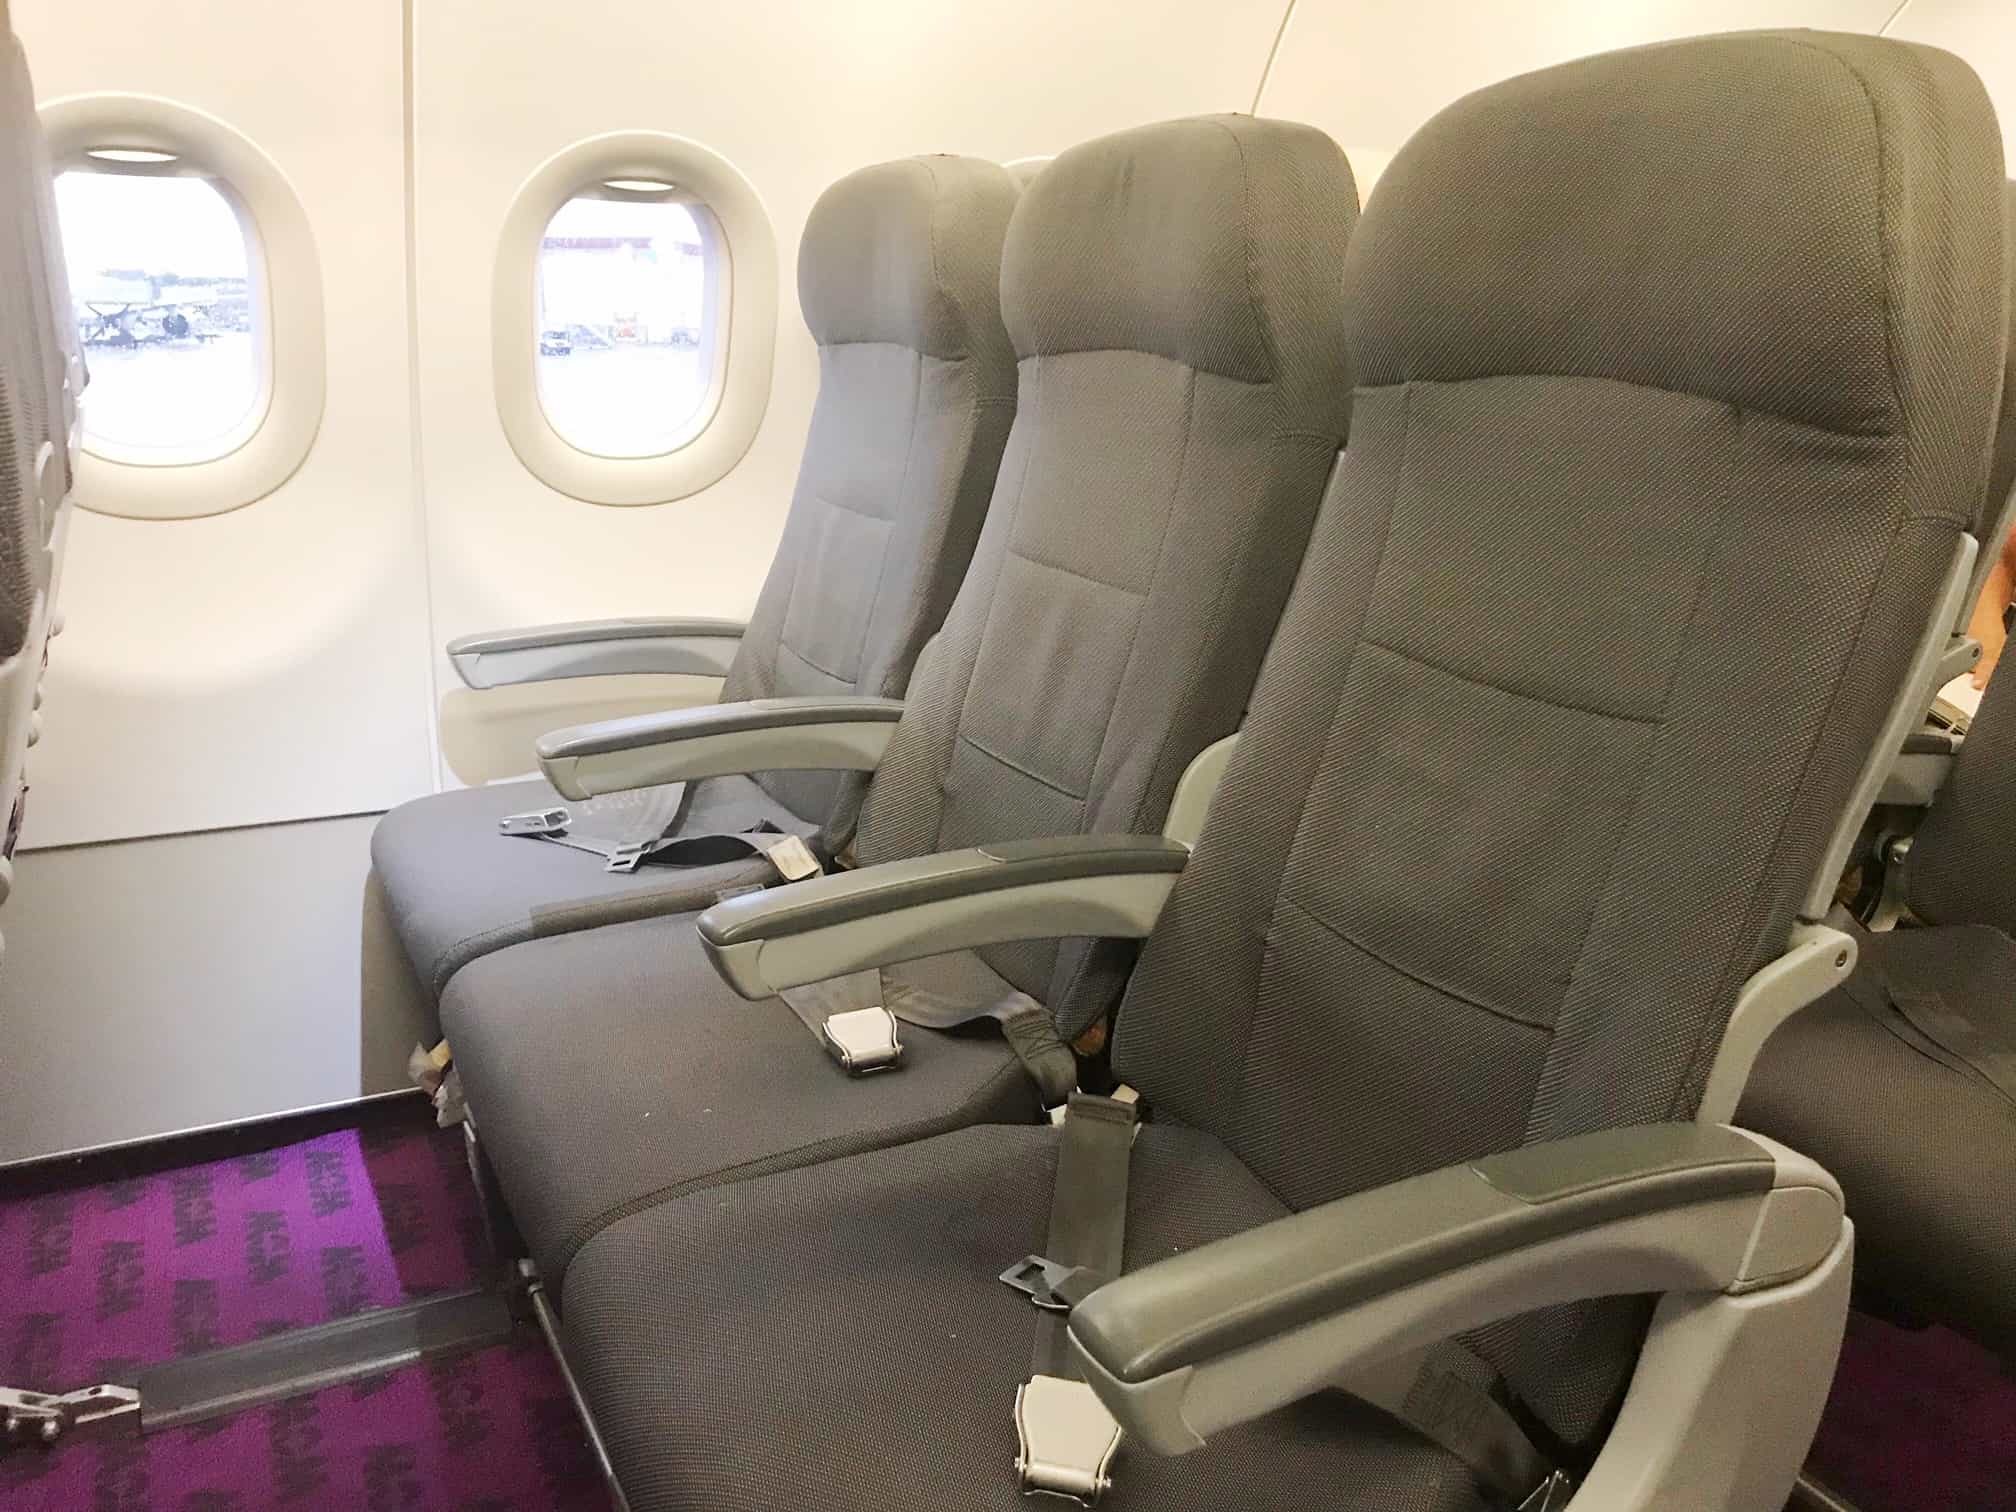 What It's Really Like Flying In WOW air Comfort Coach From Boston To Iceland